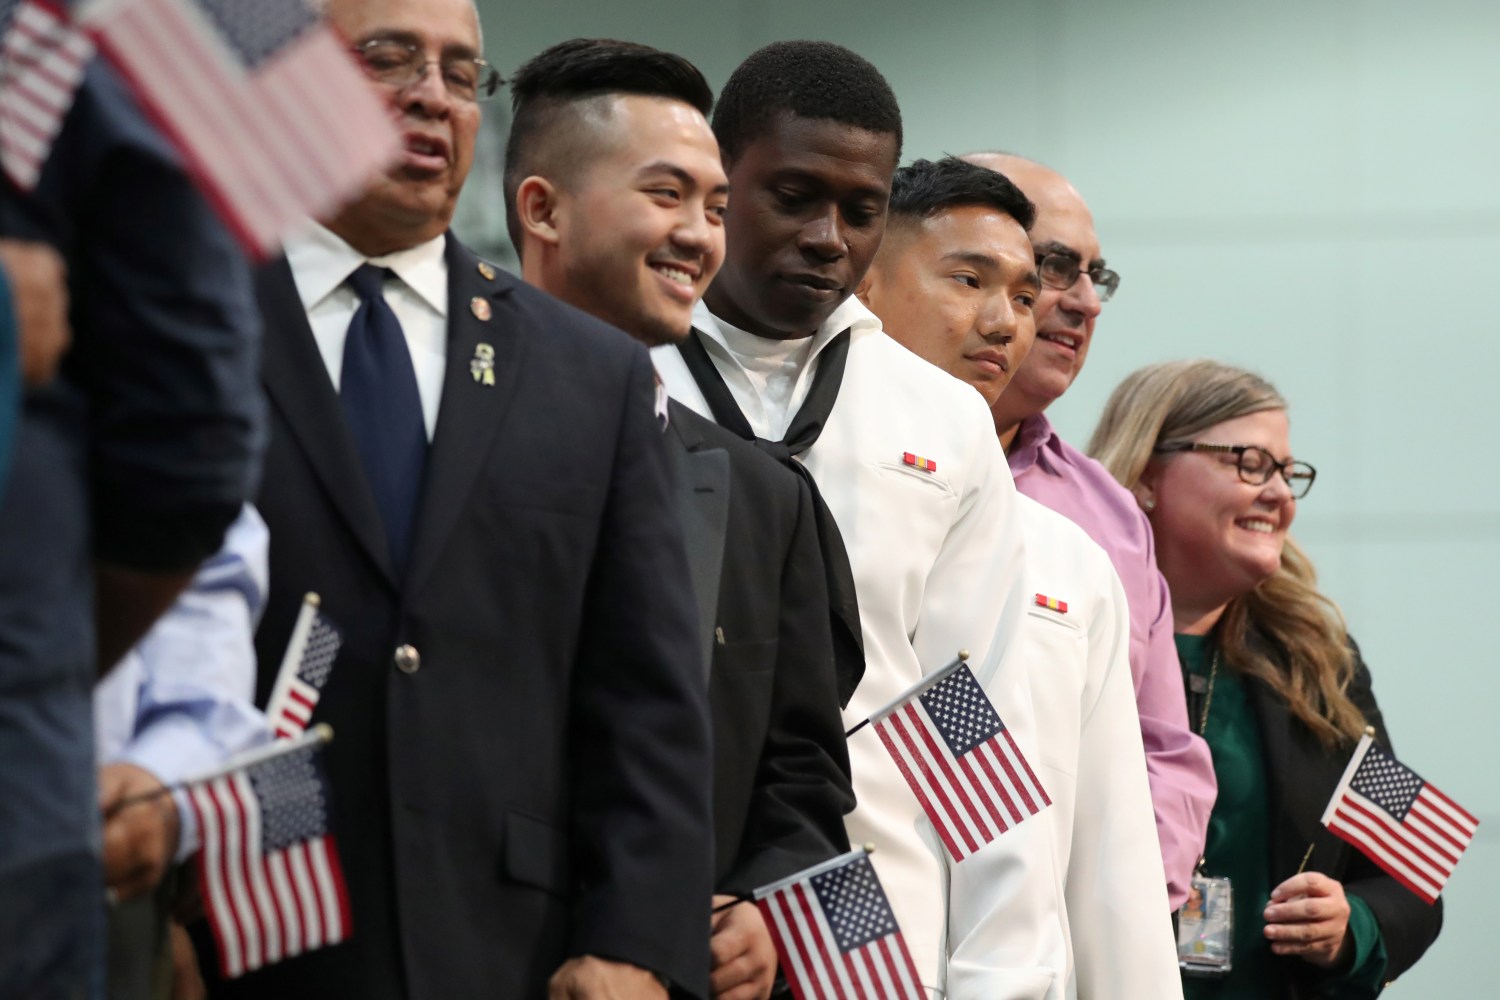 Immigrant members of the U.S. military attend a naturalization ceremony to become new U.S. citizens in Los Angeles, California, U.S., September 20, 2017. REUTERS/Lucy Nicholson